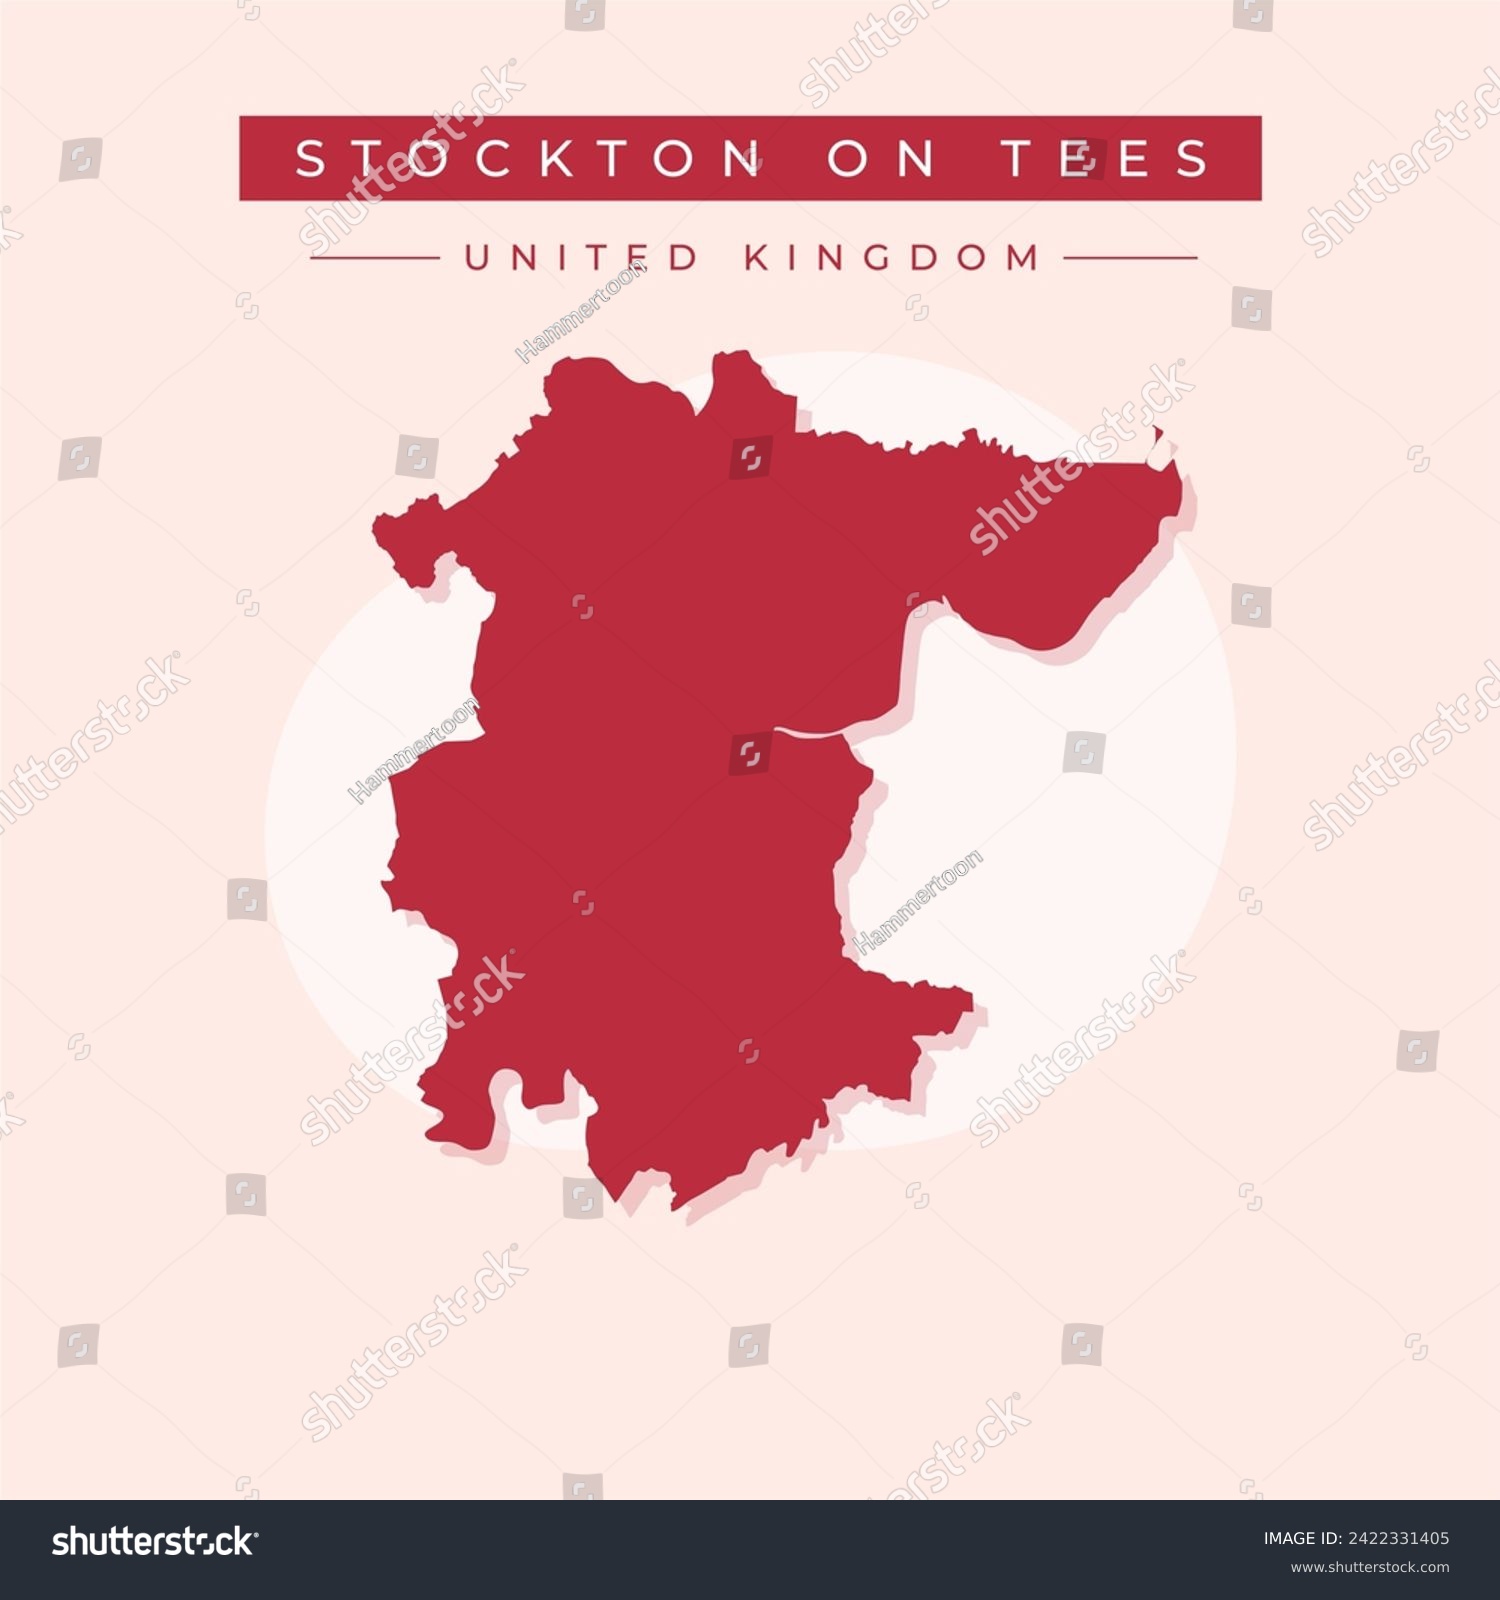 SVG of Stockton-on-Tees Borough and unitary authority (United Kingdom of Great Britain and Northern Ireland, ceremonial county Durham and North Yorkshire, England) map vector illustration, scribble sketch svg